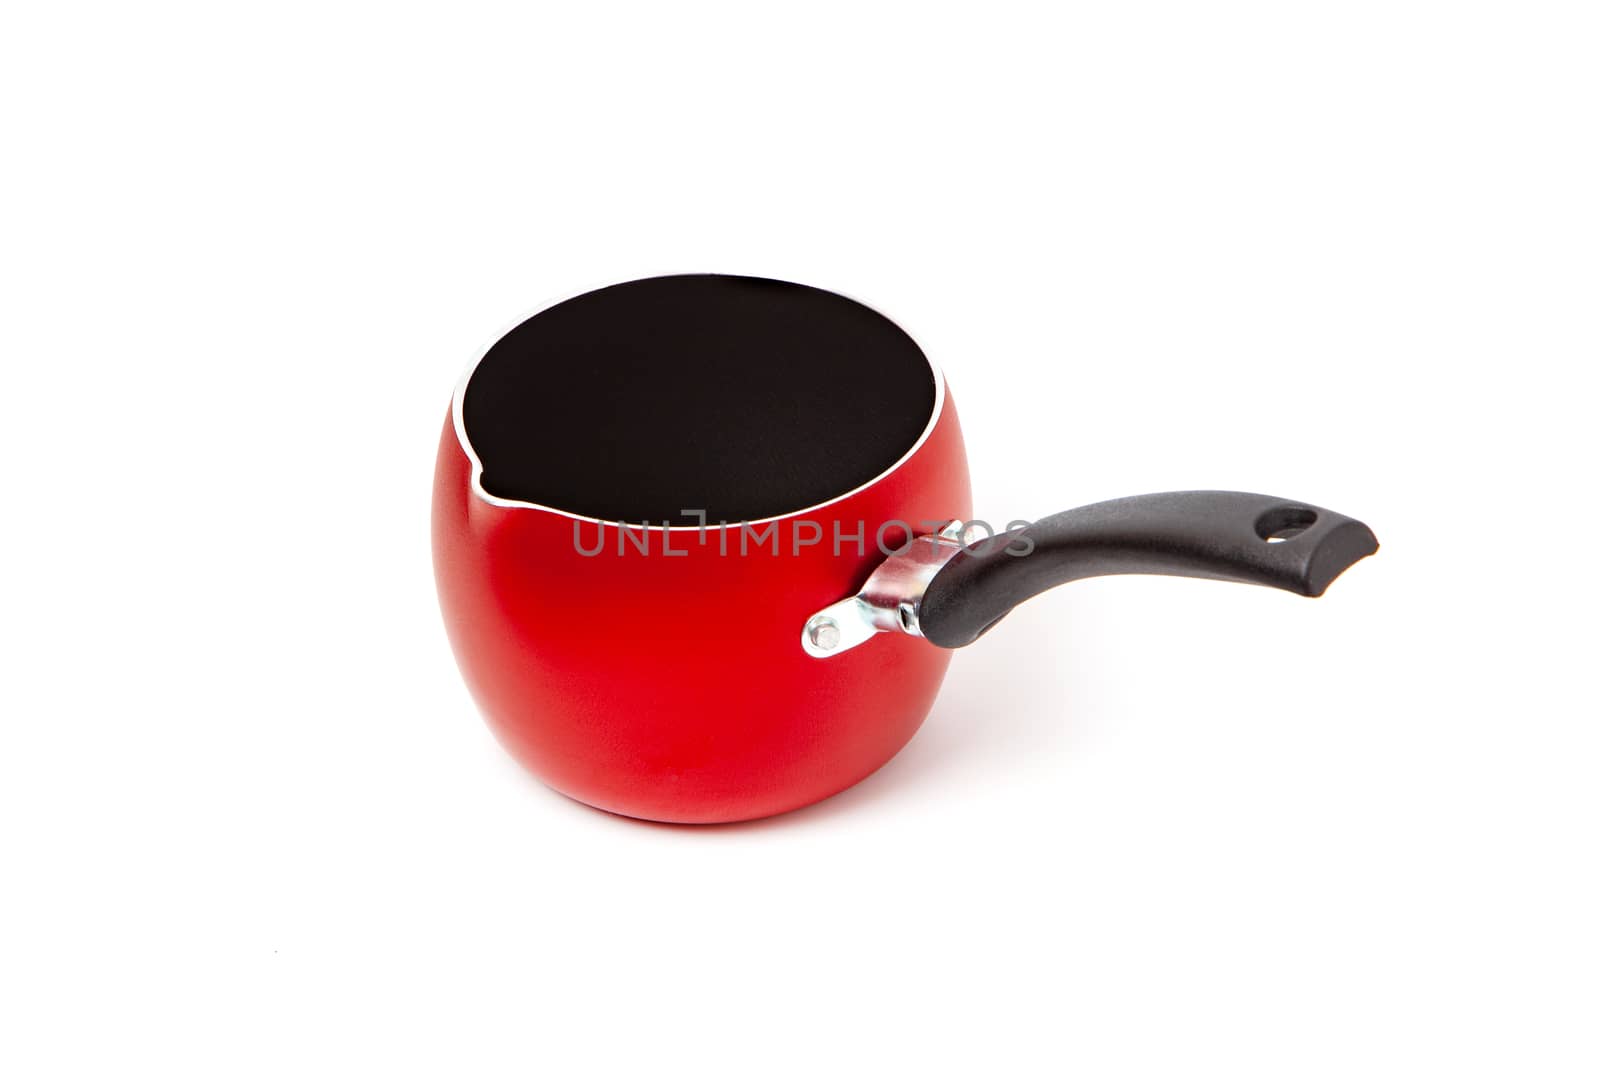 Empty Non-stick red Cooking Pot or Saucepan hat with a long handle, isolated on white background.